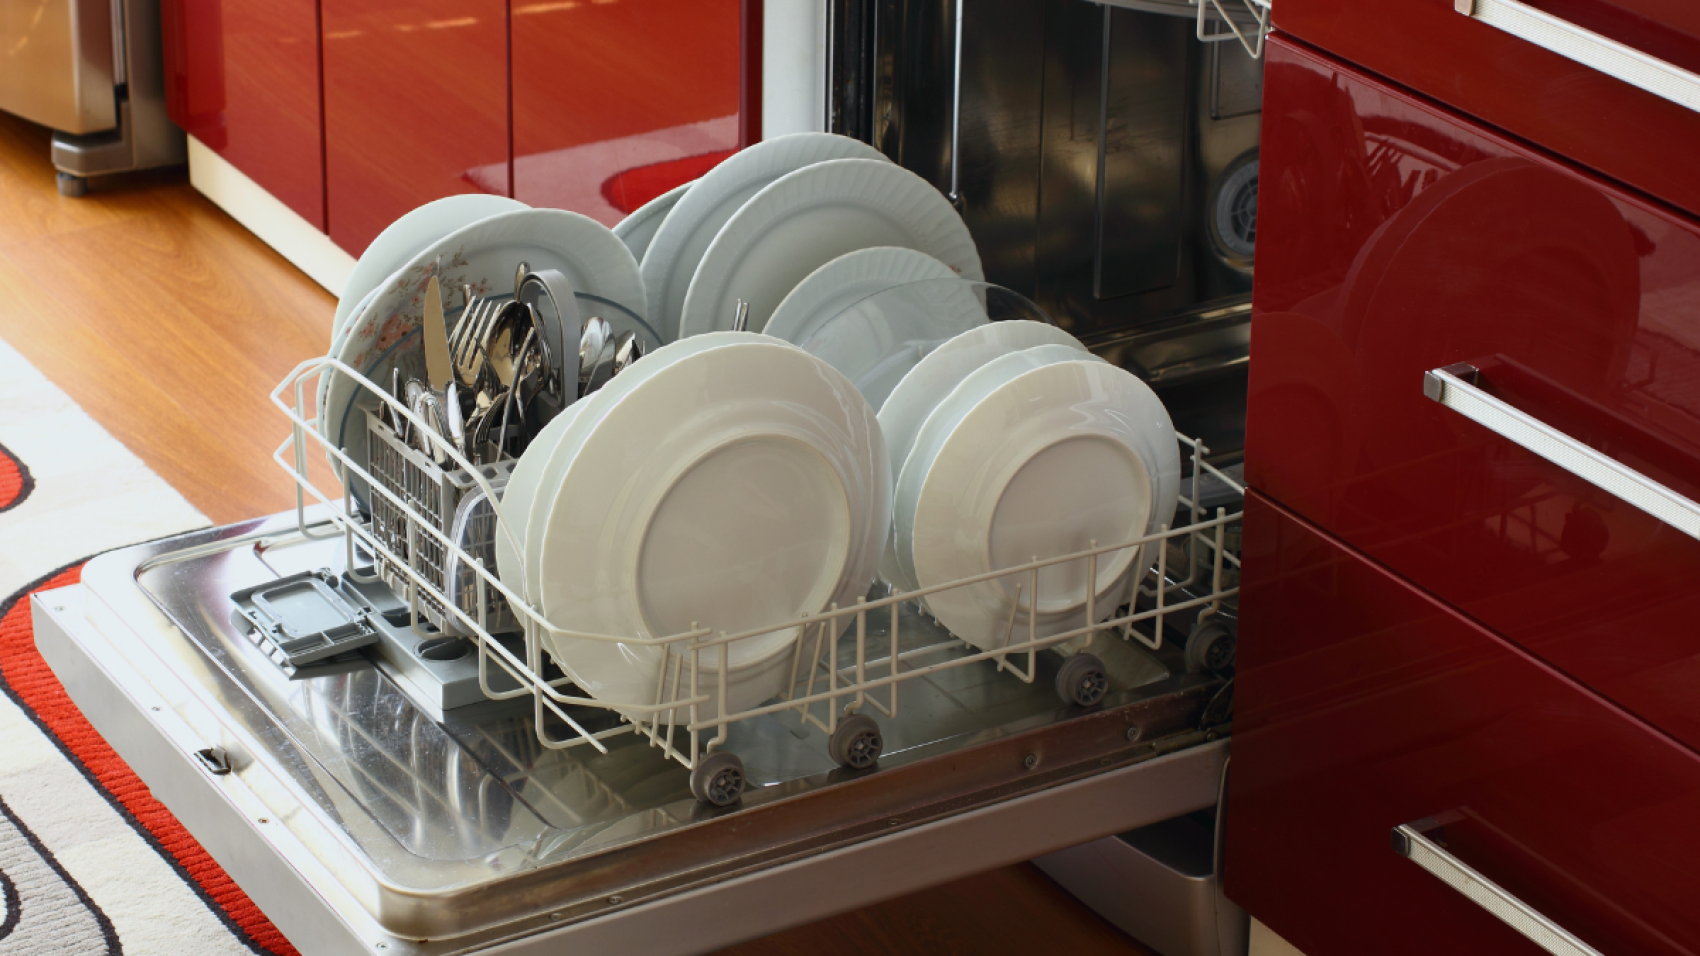 Common Causes of Dishwasher Breakdowns and How to Avoid Them